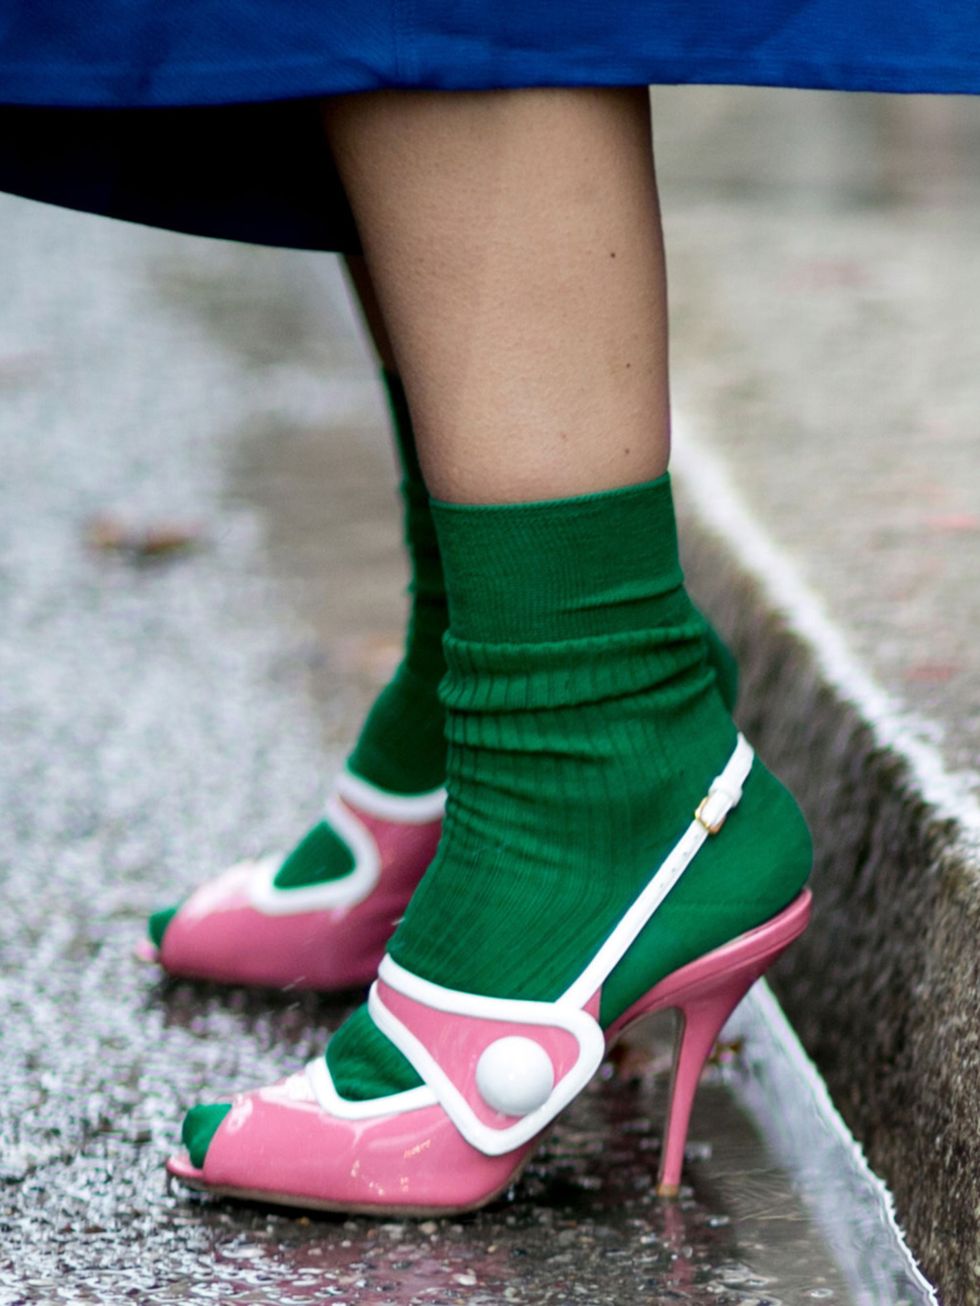 Green, Human leg, Joint, Red, Carmine, Sock, Fashion, Calf, Teal, Ankle, 